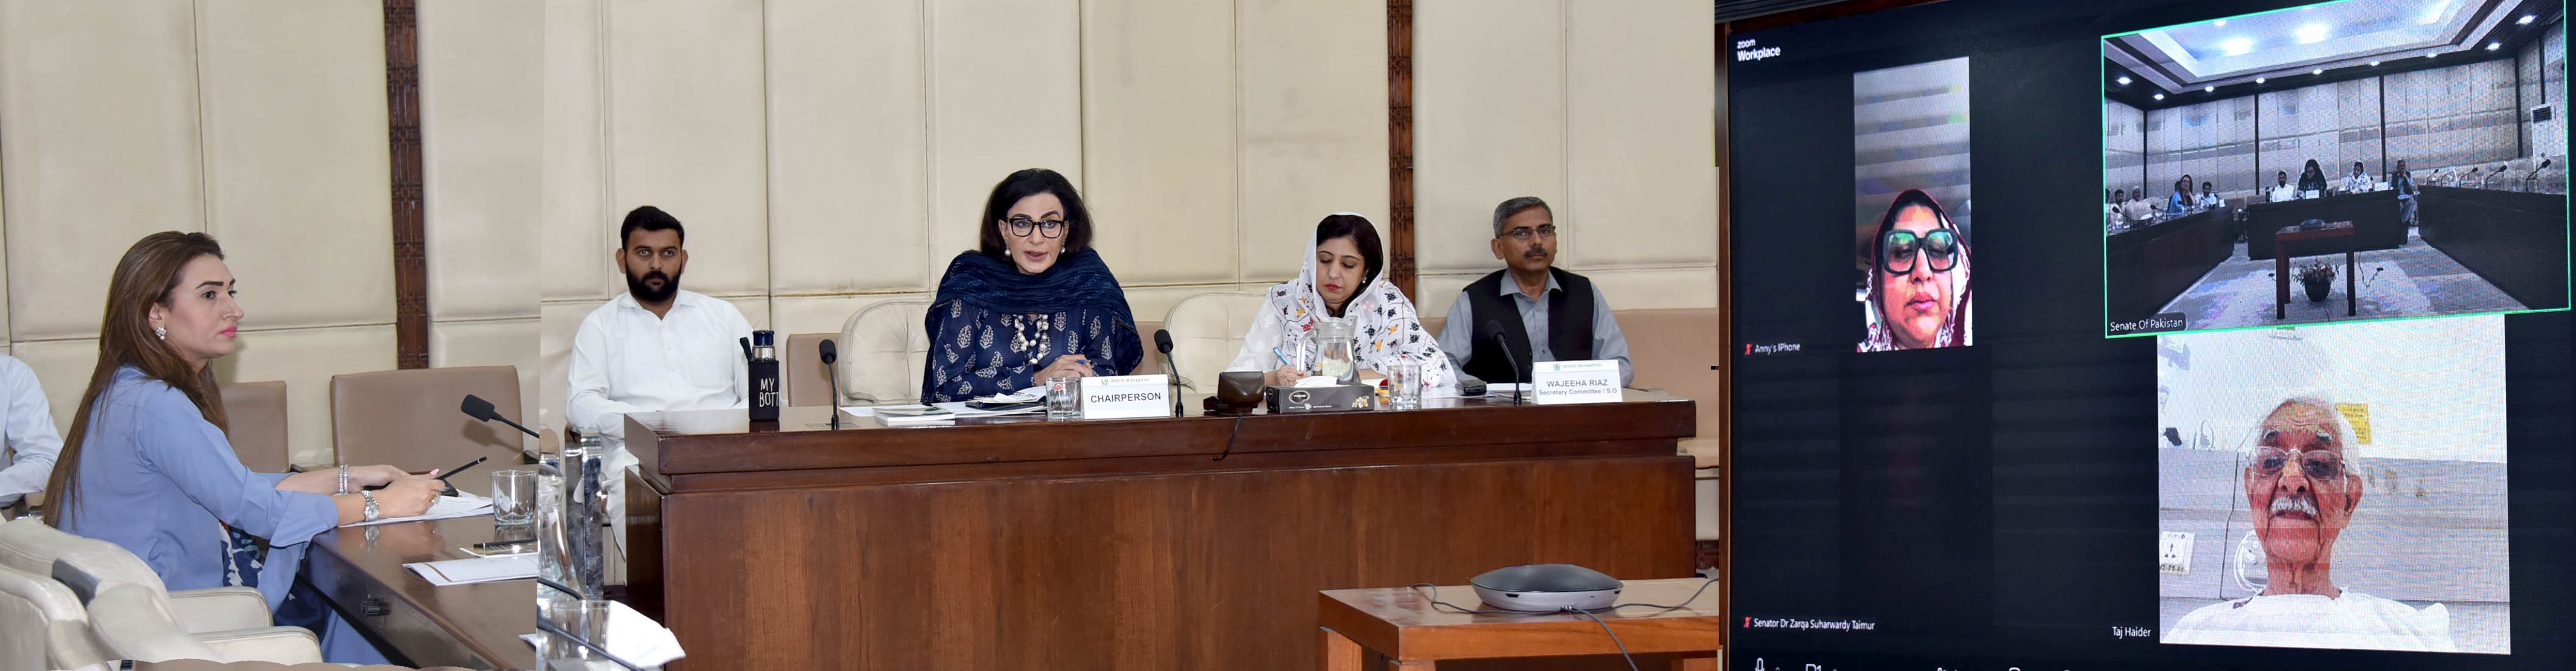 Senator Sherry Rehman, Chairperson Senate Standing Committee on Climate Change Presiding over a Meeting of The Committee at Parliament House Islamabad